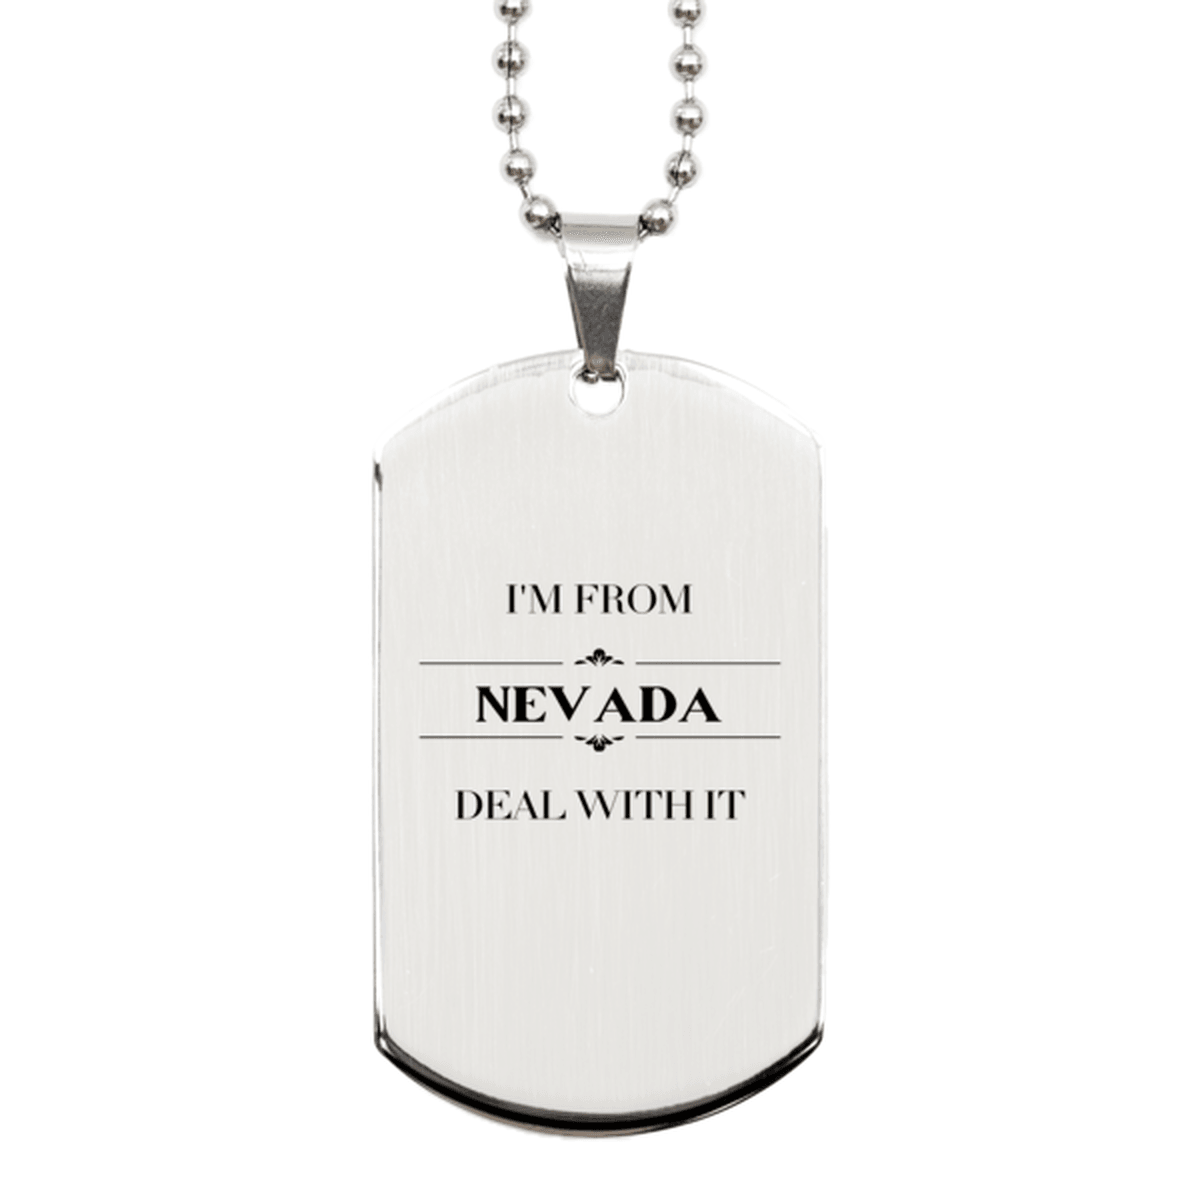 I'm from Nevada, Deal with it, Proud Nevada State Gifts, Nevada Silver Dog Tag Gift Idea, Christmas Gifts for Nevada People, Coworkers, Colleague - Mallard Moon Gift Shop